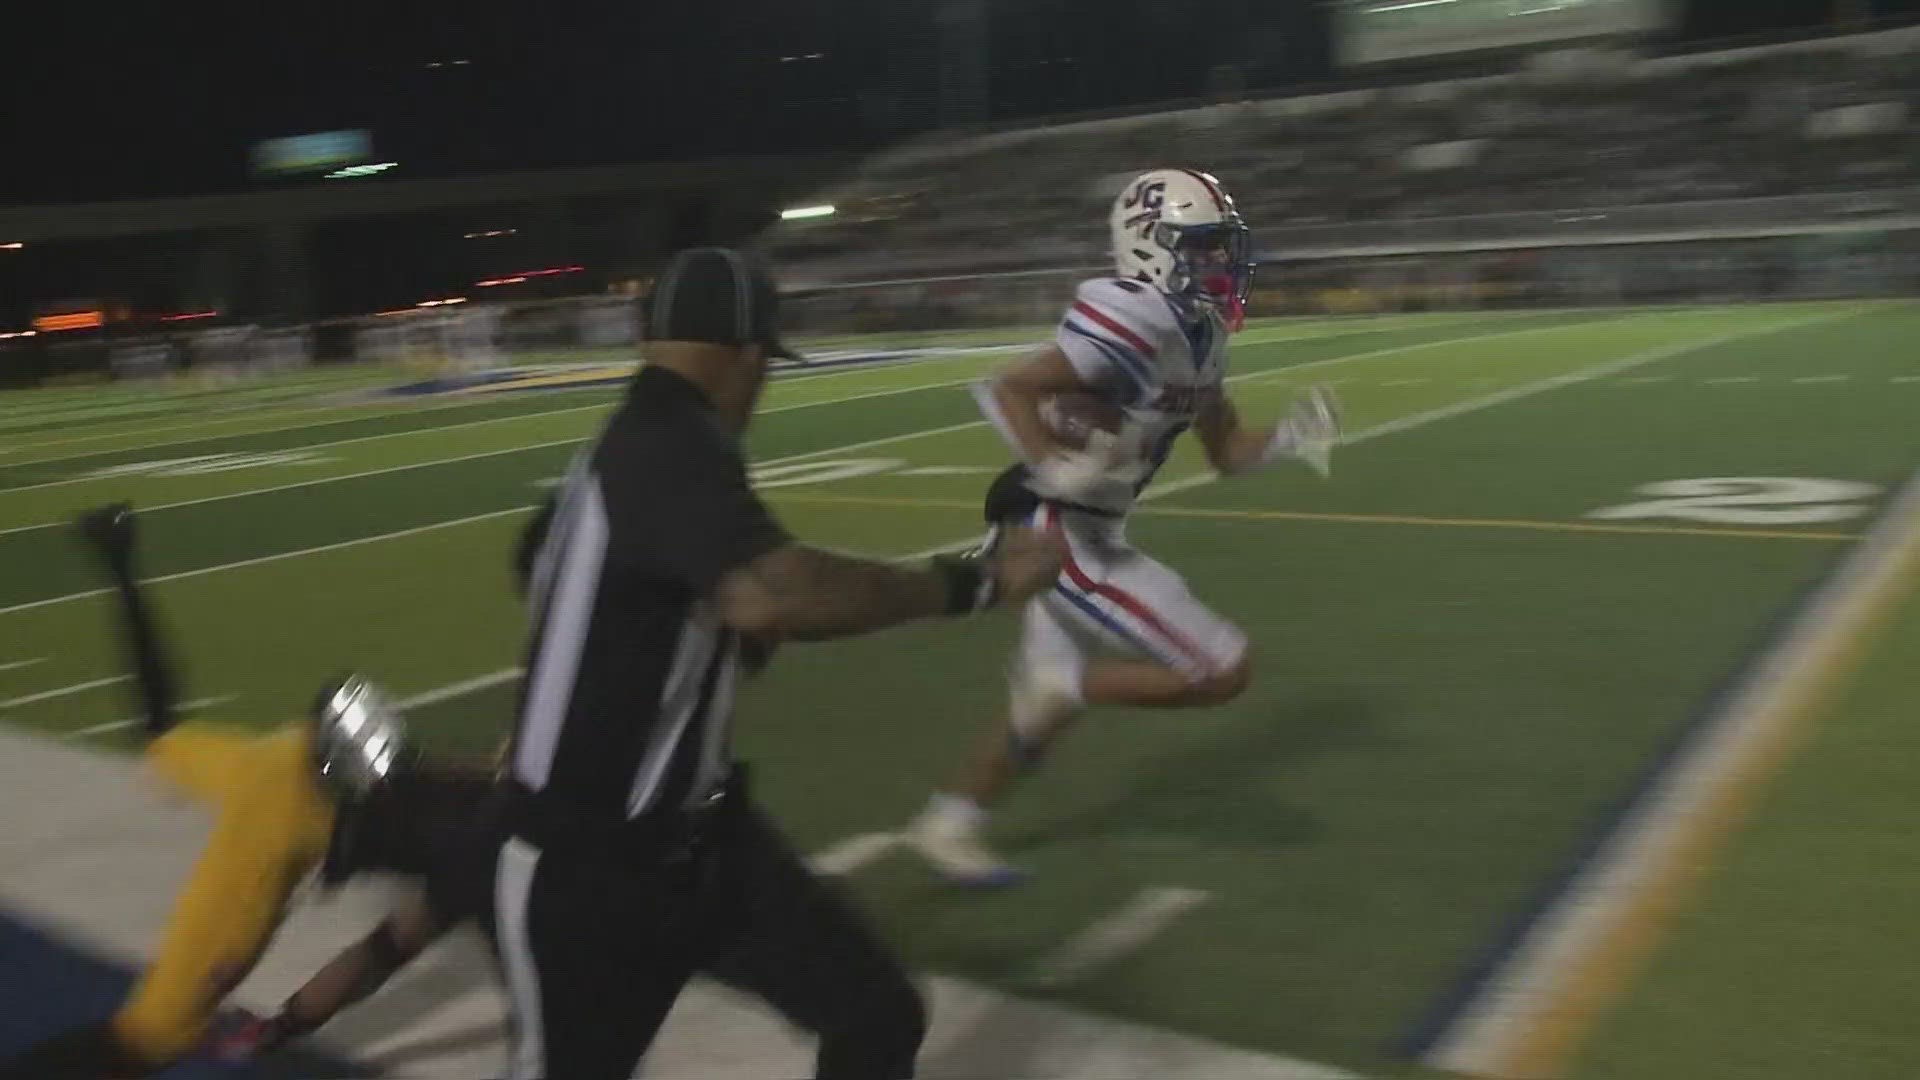 Friday Nov. 3 game highlights. John Curtis beat Karr 41-7 and St. Paul's win against Fontainebleau 38-21.